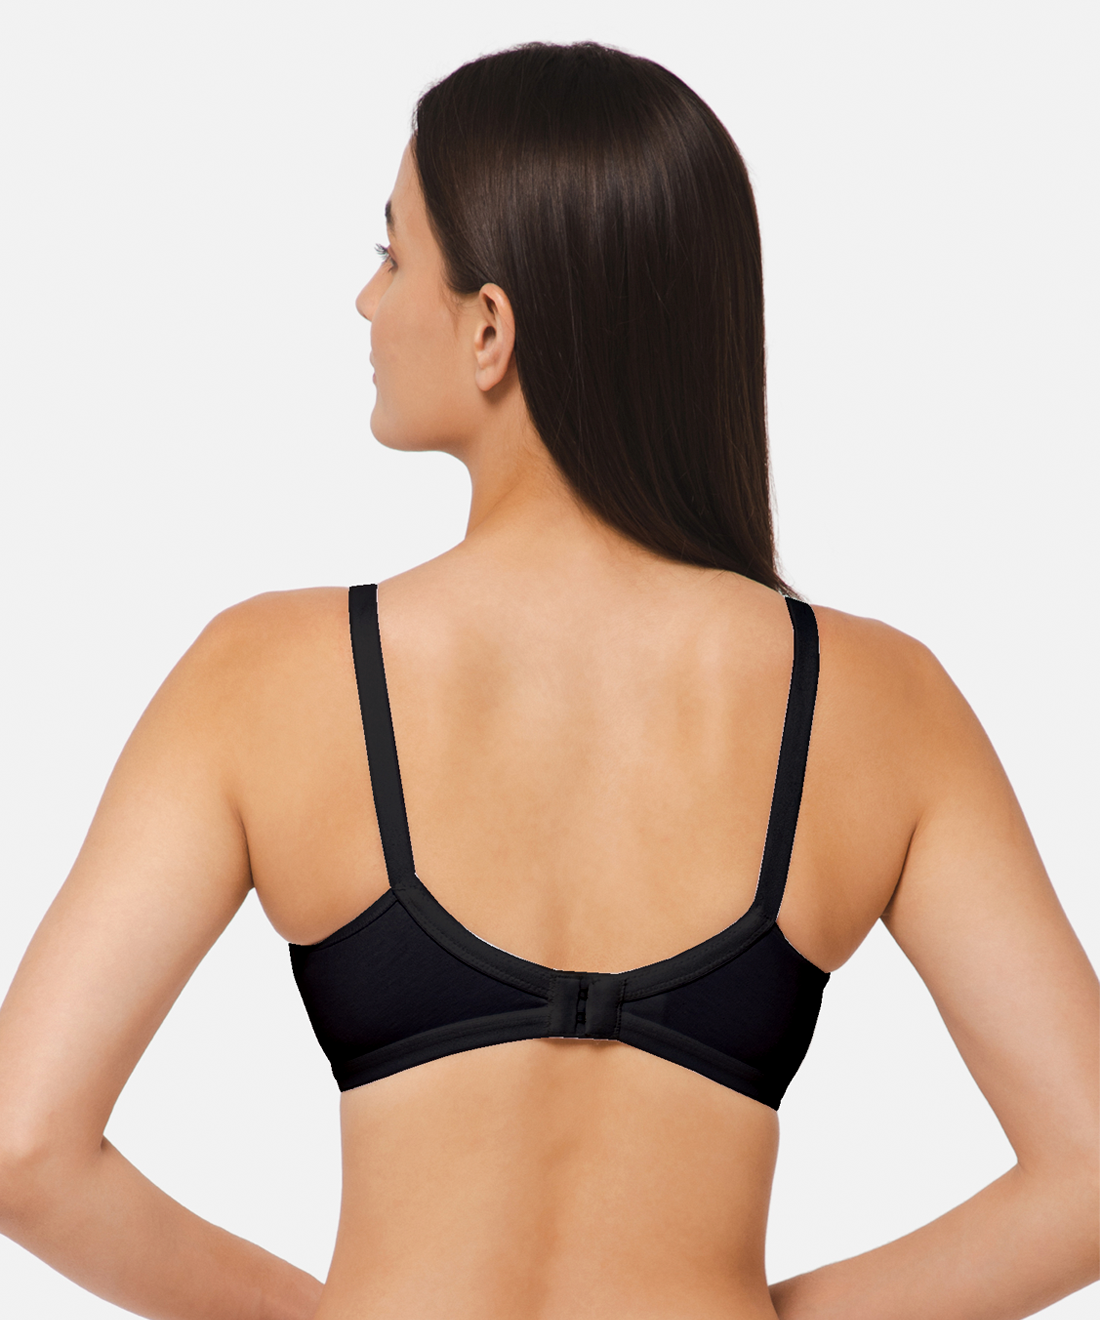 AUSM Willow - Padded Brassiere | Molded Cup for High Coverage | Soft Padded for Superior Comfort | Suitable for T-Shirt & Western Wear